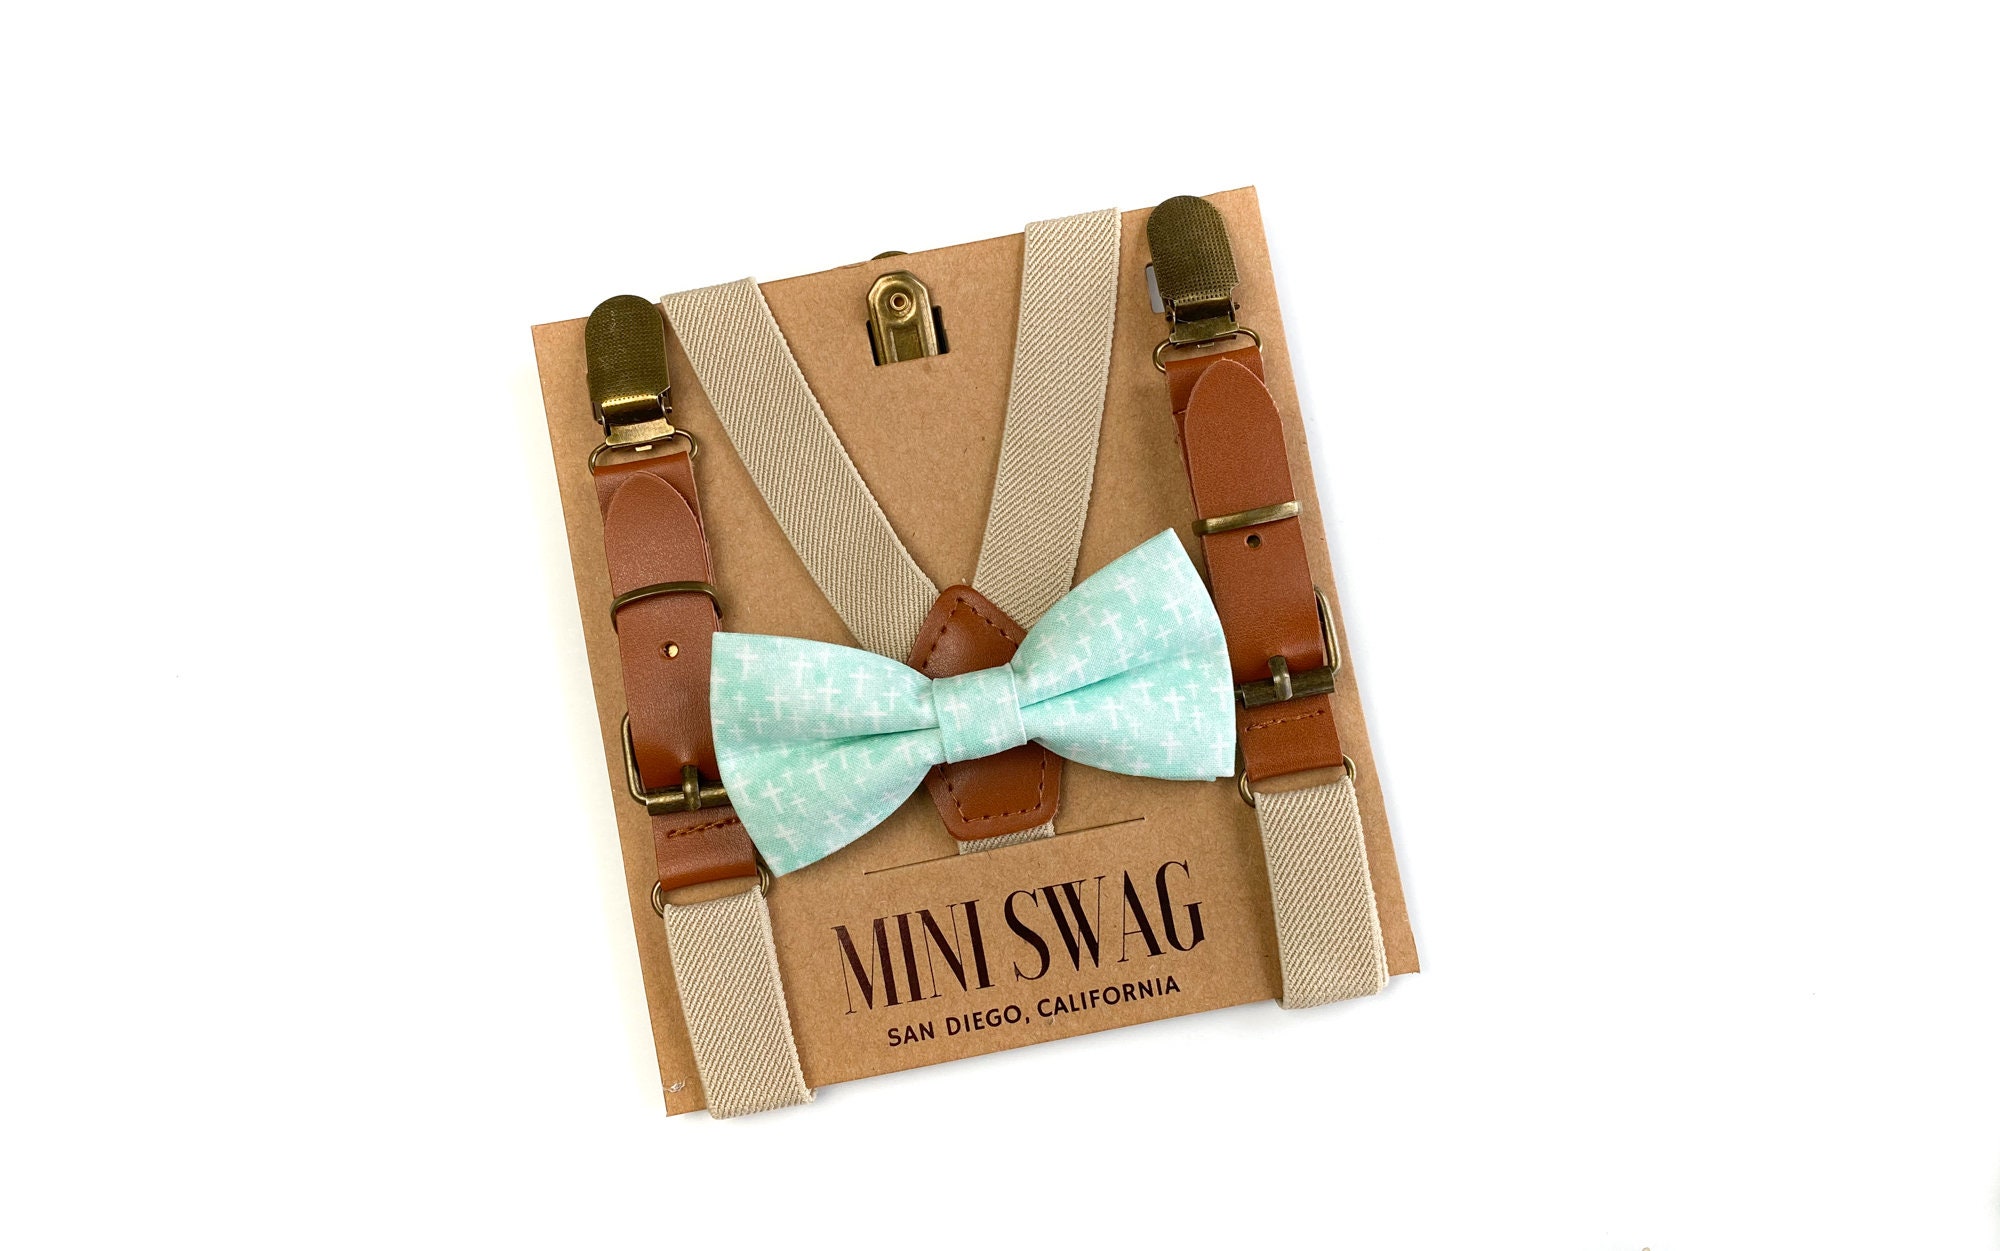 Aqua Blue Cross Bow Tie & Suspenders - Perfect For Boys Confirmation, Christening, Baptism, First Communion, Easter Outfit, Christian Gift